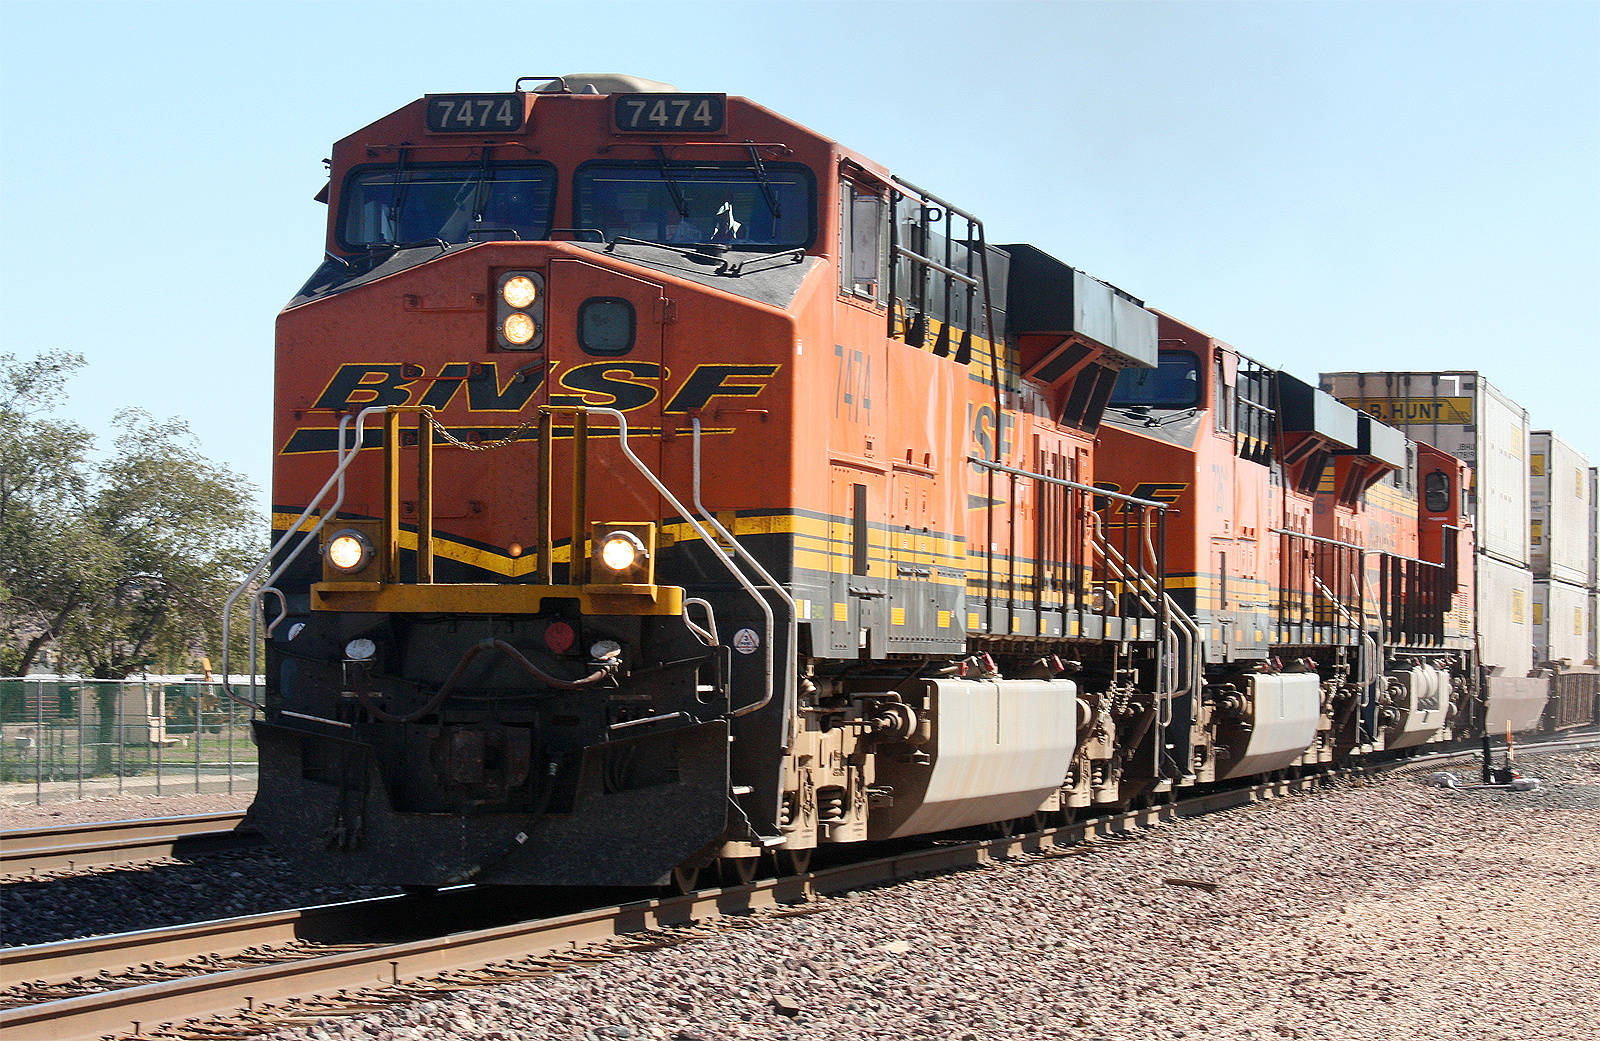 "BNSF Container Freight Train on its way through Holbrook"